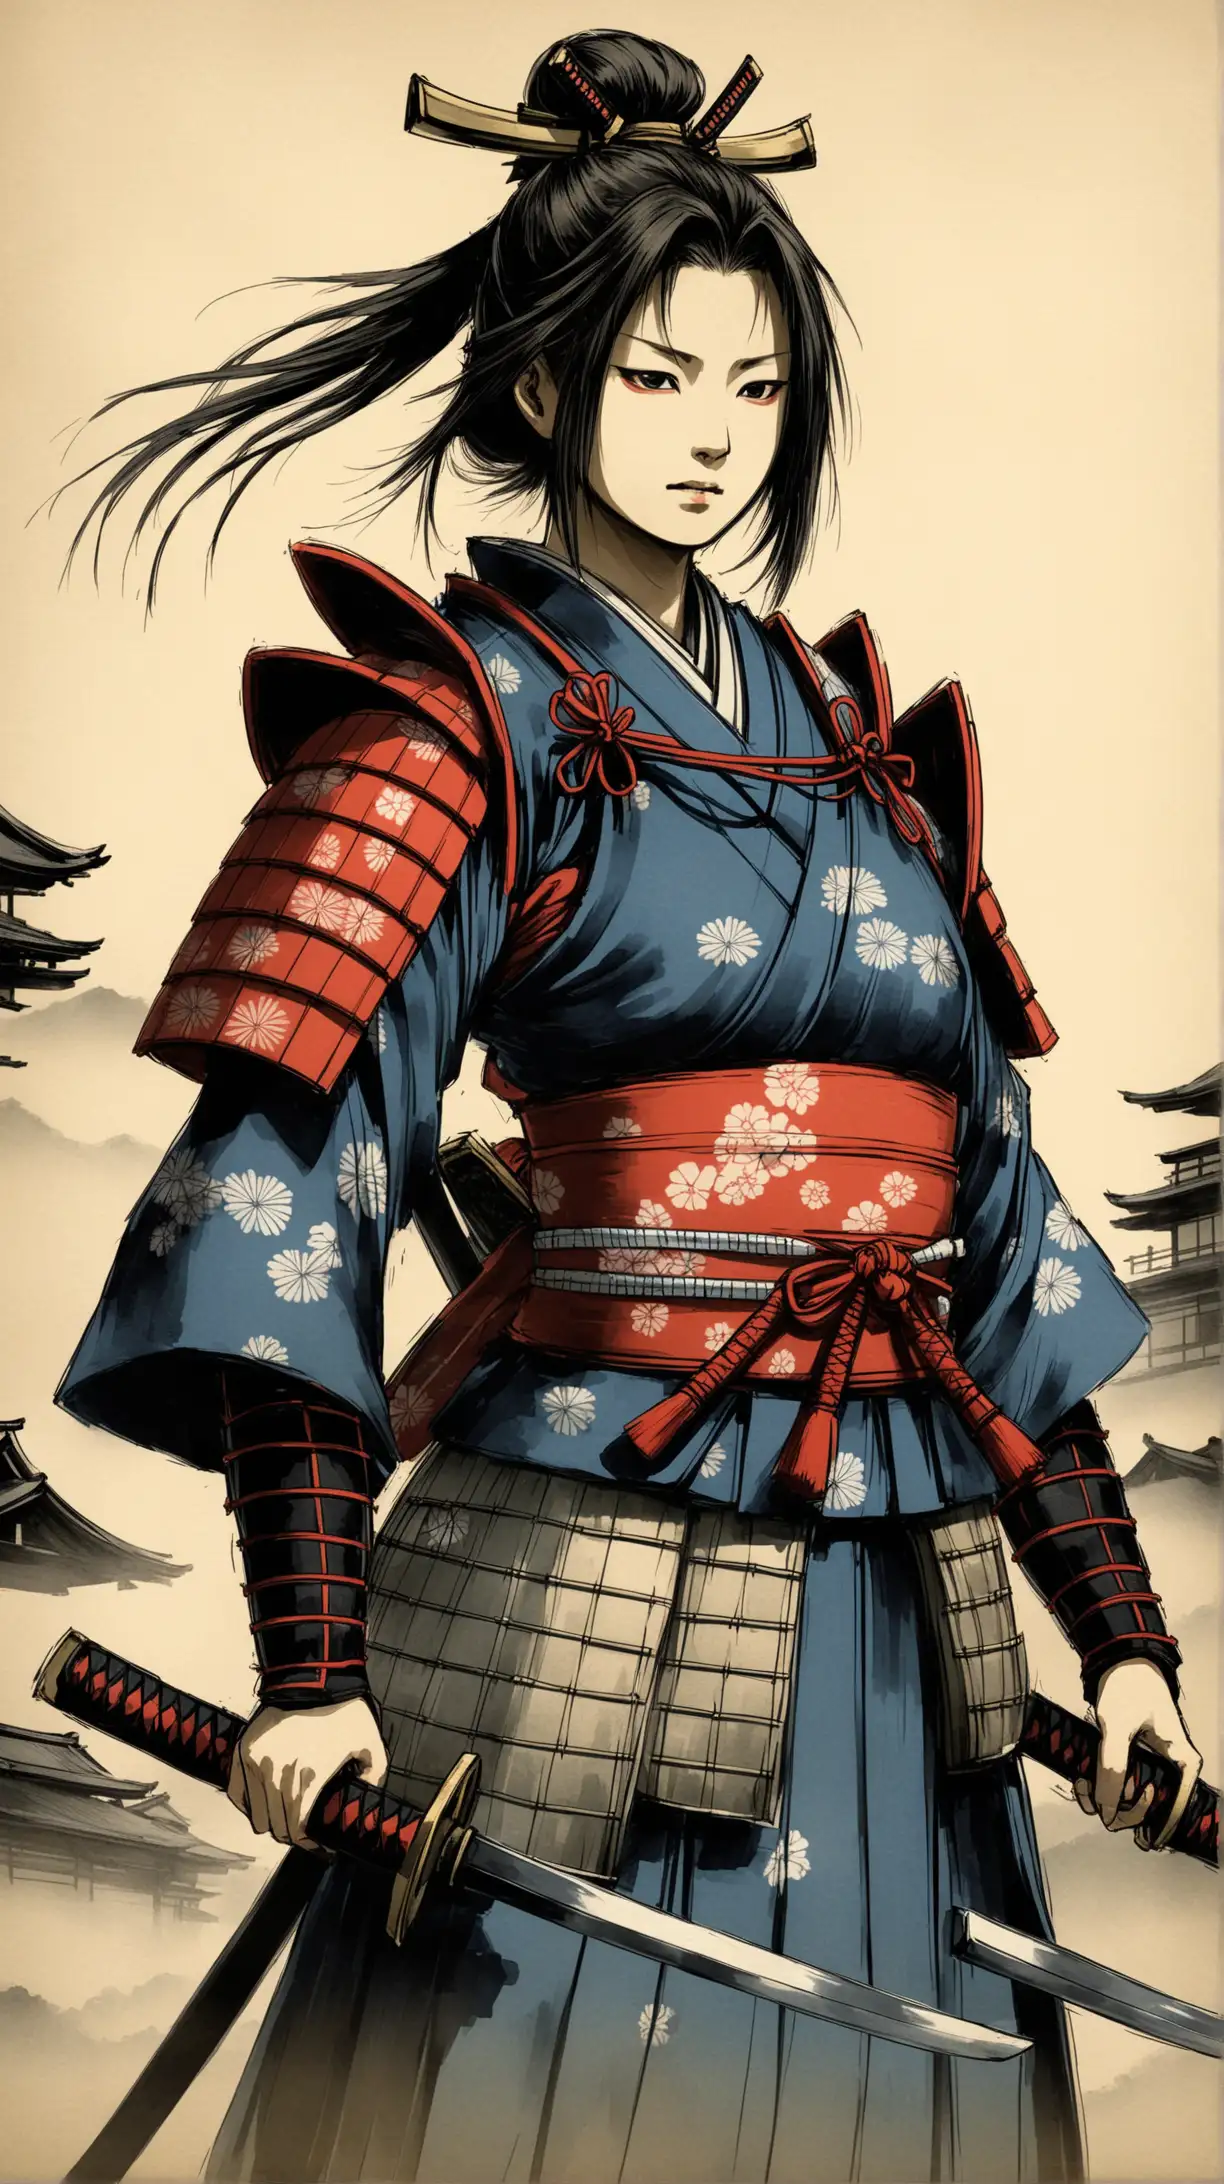 Courageous Female Samurai in Feudal Japan Engages in Battle